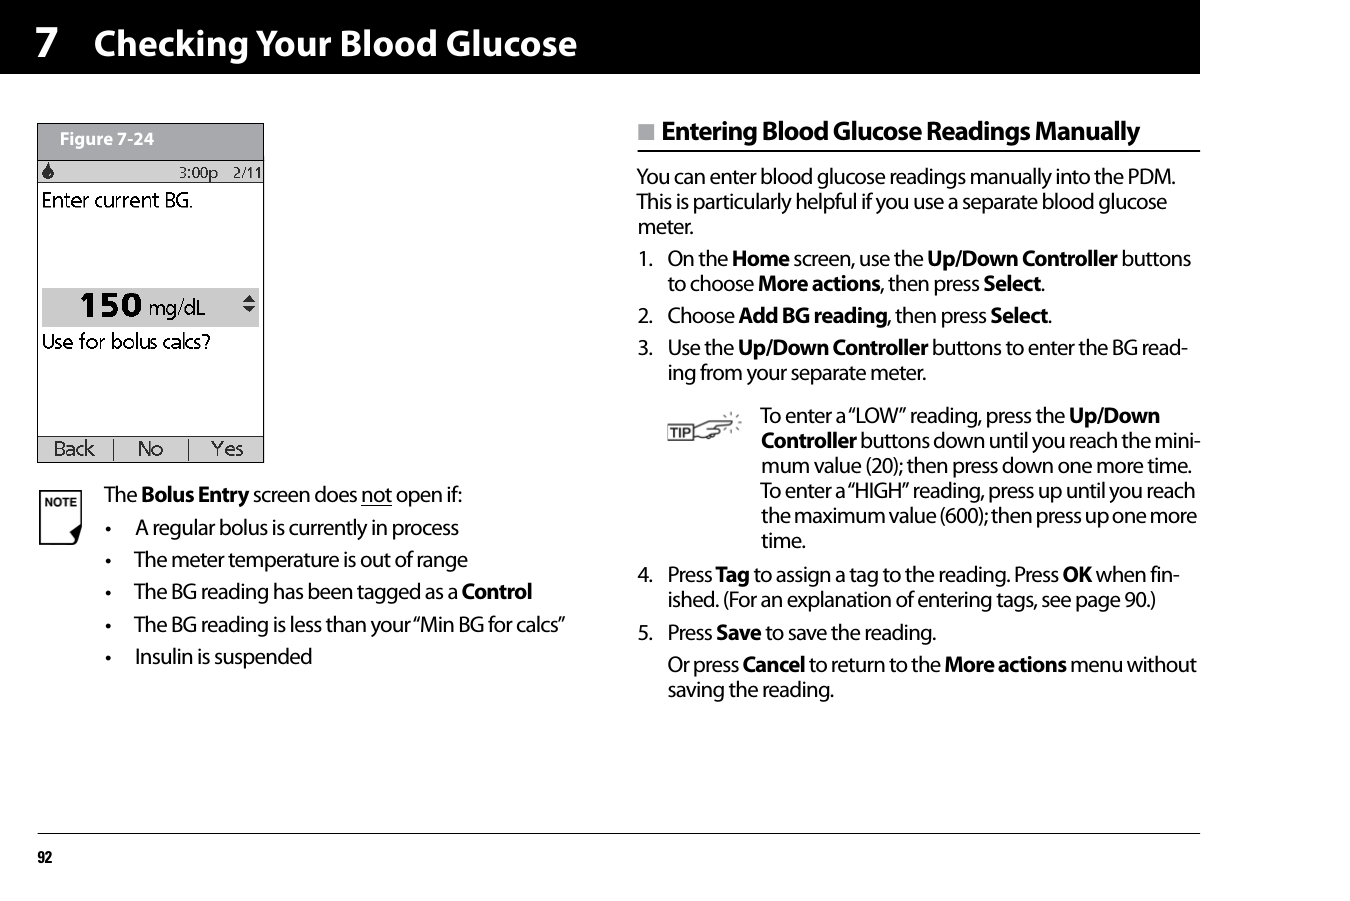 Checking Your Blood Glucose927n Entering Blood Glucose Readings ManuallyYou can enter blood glucose readings manually into the PDM. This is particularly helpful if you use a separate blood glucose meter. 1. On the Home screen, use the Up/Down Controller buttons to choose More actions, then press Select.2. Choose Add BG reading, then press Select.3. Use the Up/Down Controller buttons to enter the BG read-ing from your separate meter.4. Press Tag to assign a tag to the reading. Press OK when fin-ished. (For an explanation of entering tags, see page 90.)5. Press Save to save the reading.Or press Cancel to return to the More actions menu without saving the reading.The Bolus Entry screen does not open if:• A regular bolus is currently in process• The meter temperature is out of range• The BG reading has been tagged as a Control• The BG reading is less than your “Min BG for calcs”• Insulin is suspendedFigure 7-24To enter a “LOW” reading, press the Up/Down Controller buttons down until you reach the mini-mum value (20); then press down one more time. To enter a “HIGH” reading, press up until you reach the maximum value (600); then press up one more time.